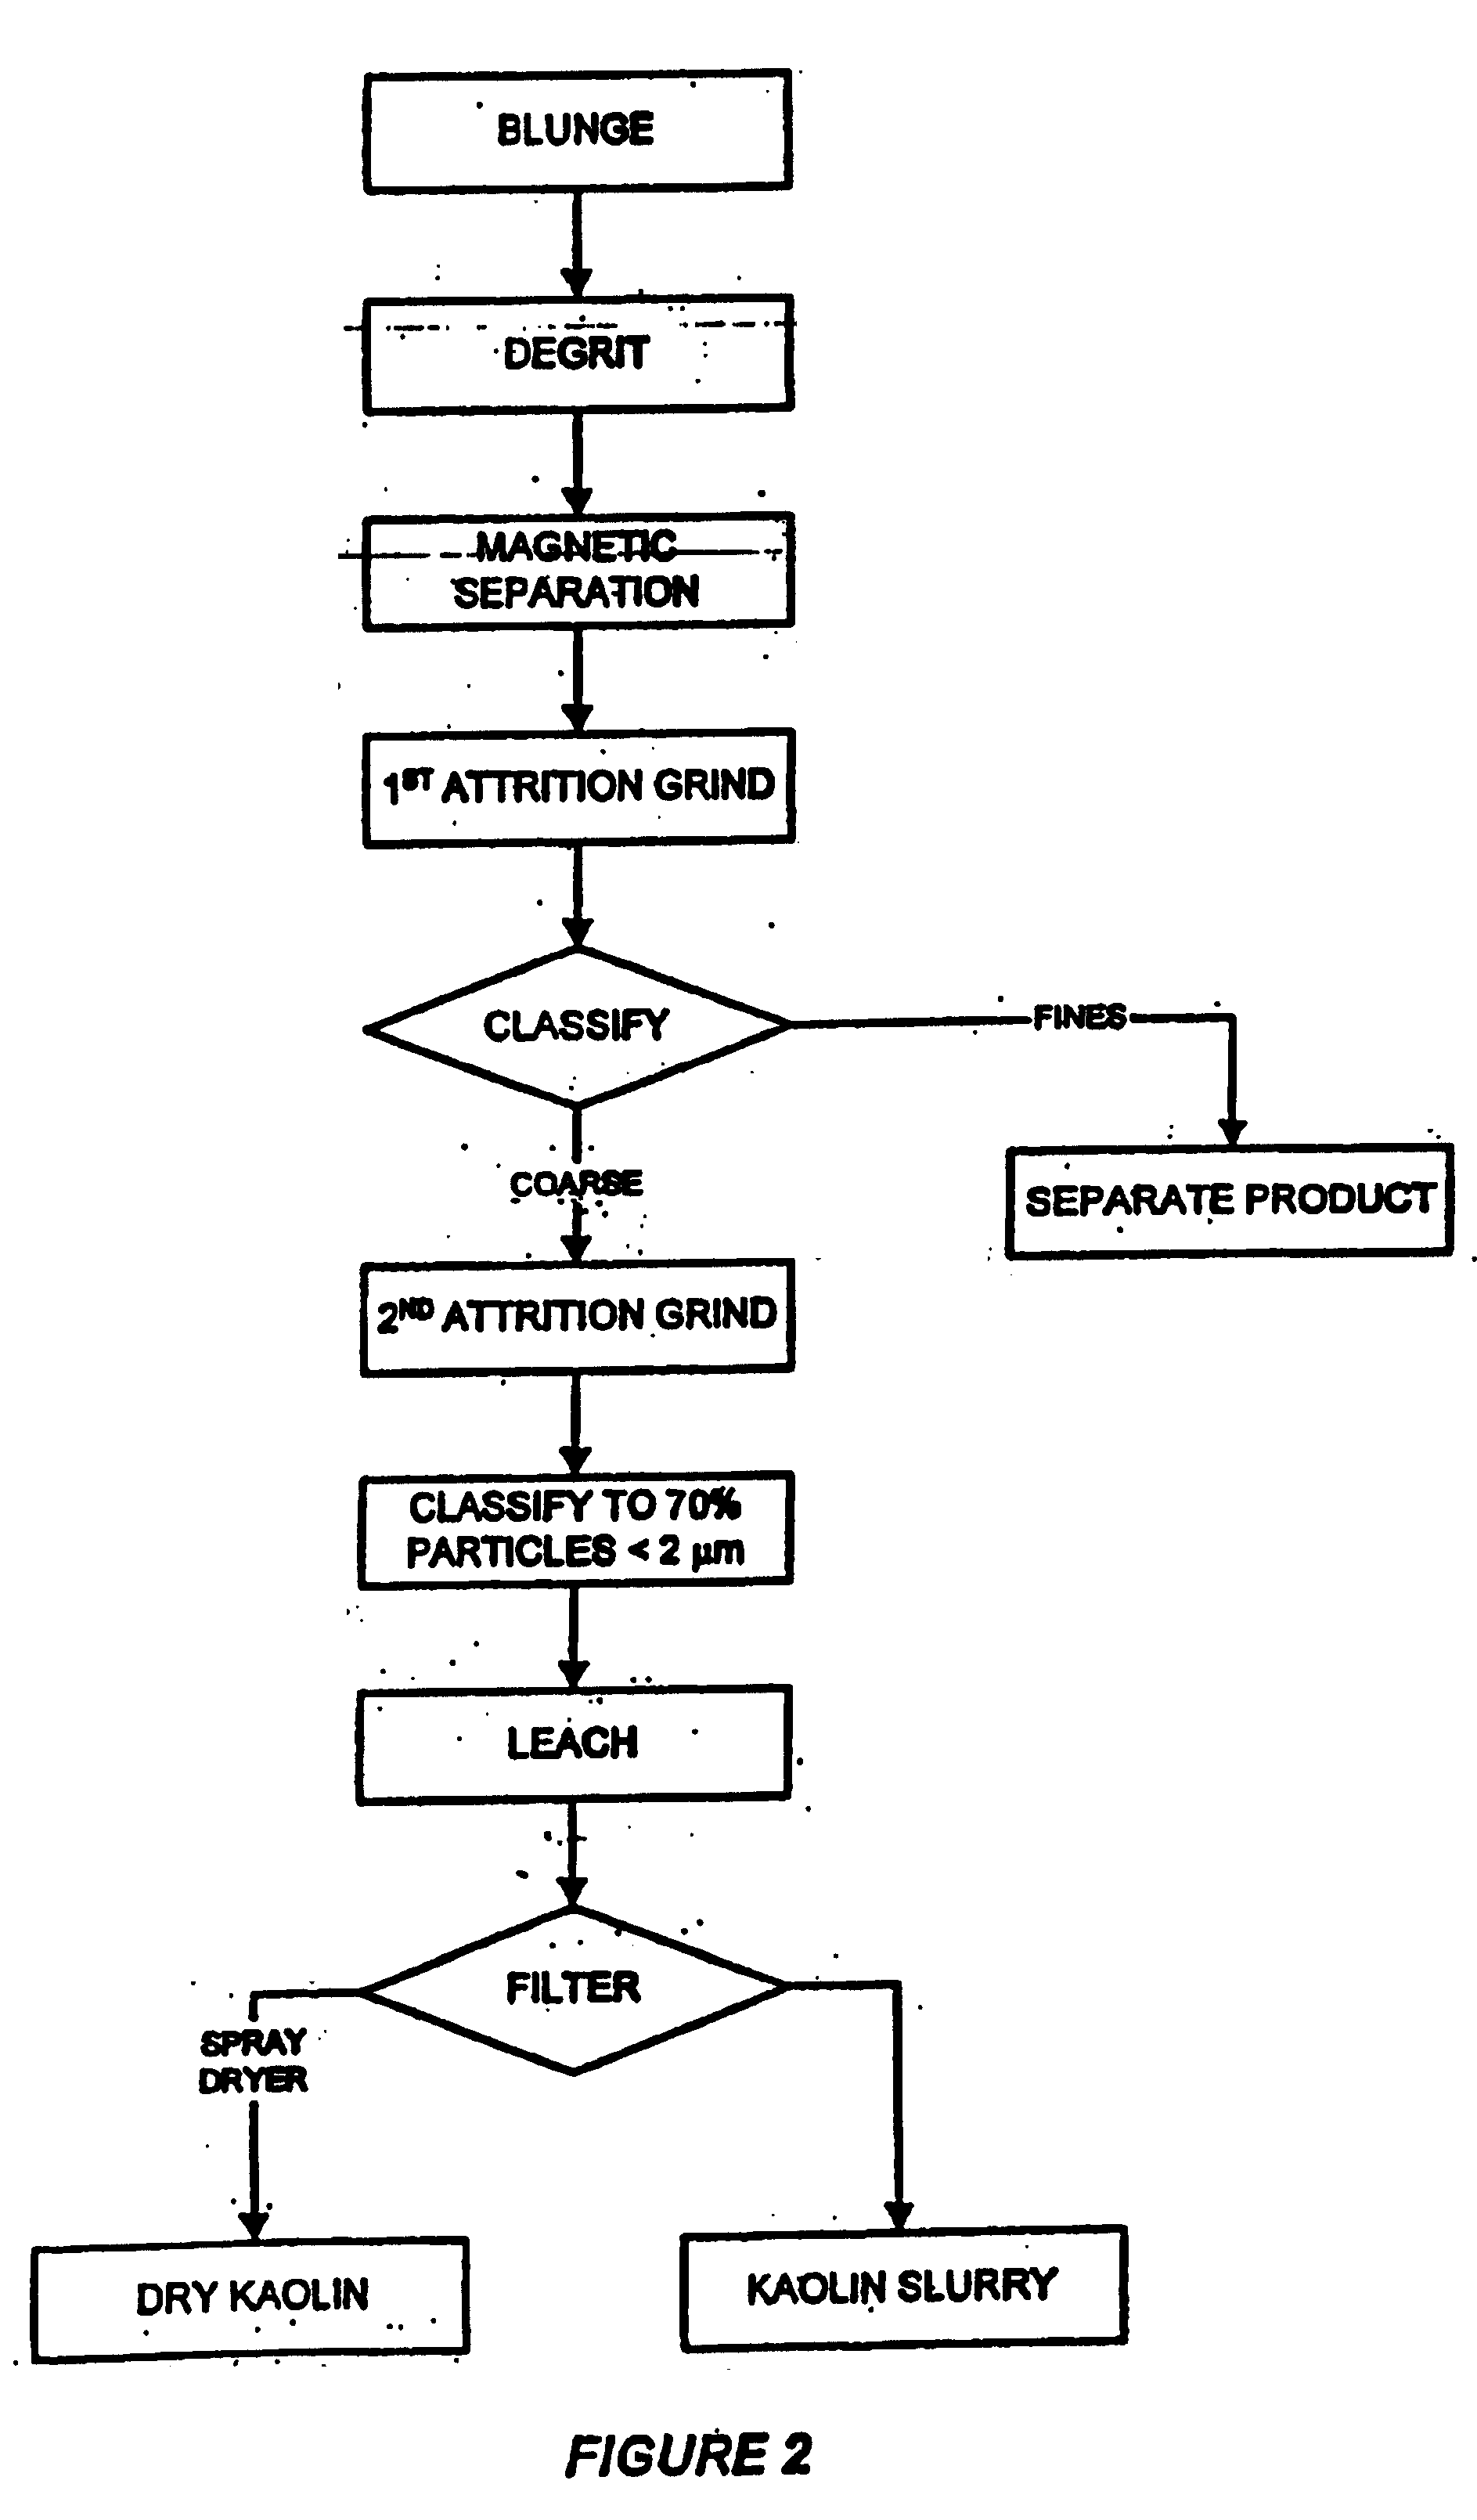 Hyperplaty clays and their use in paper coating and filling, methods for making same, and paper products having improved brightness